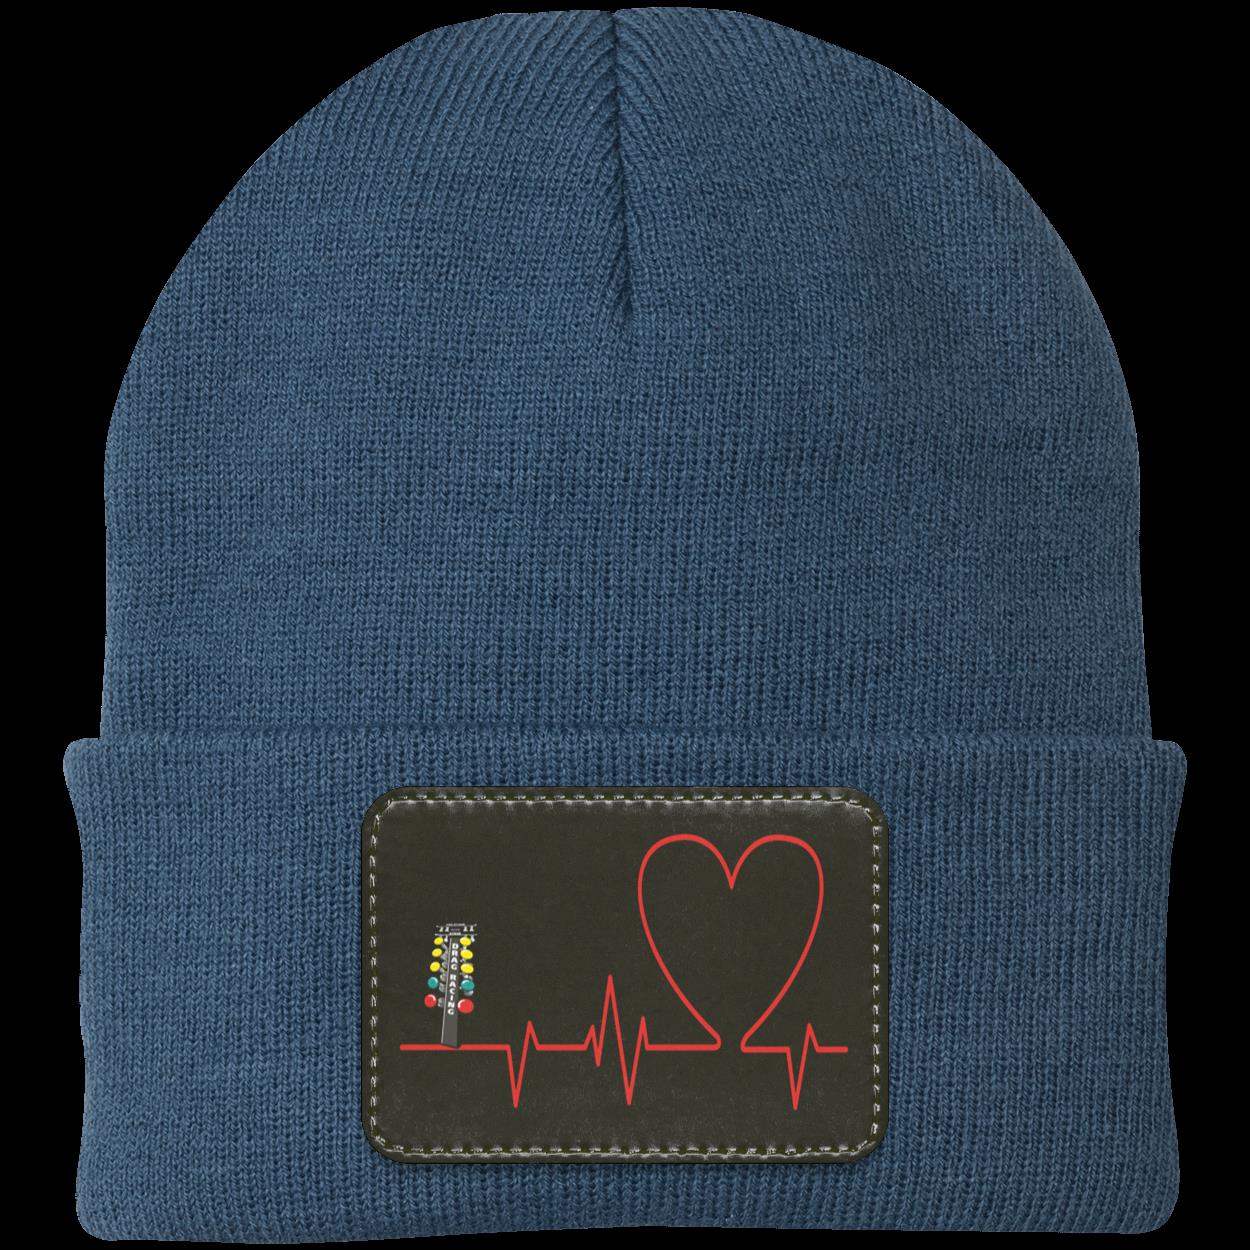 Drag Racing Heartbeat Patched Knit Cap